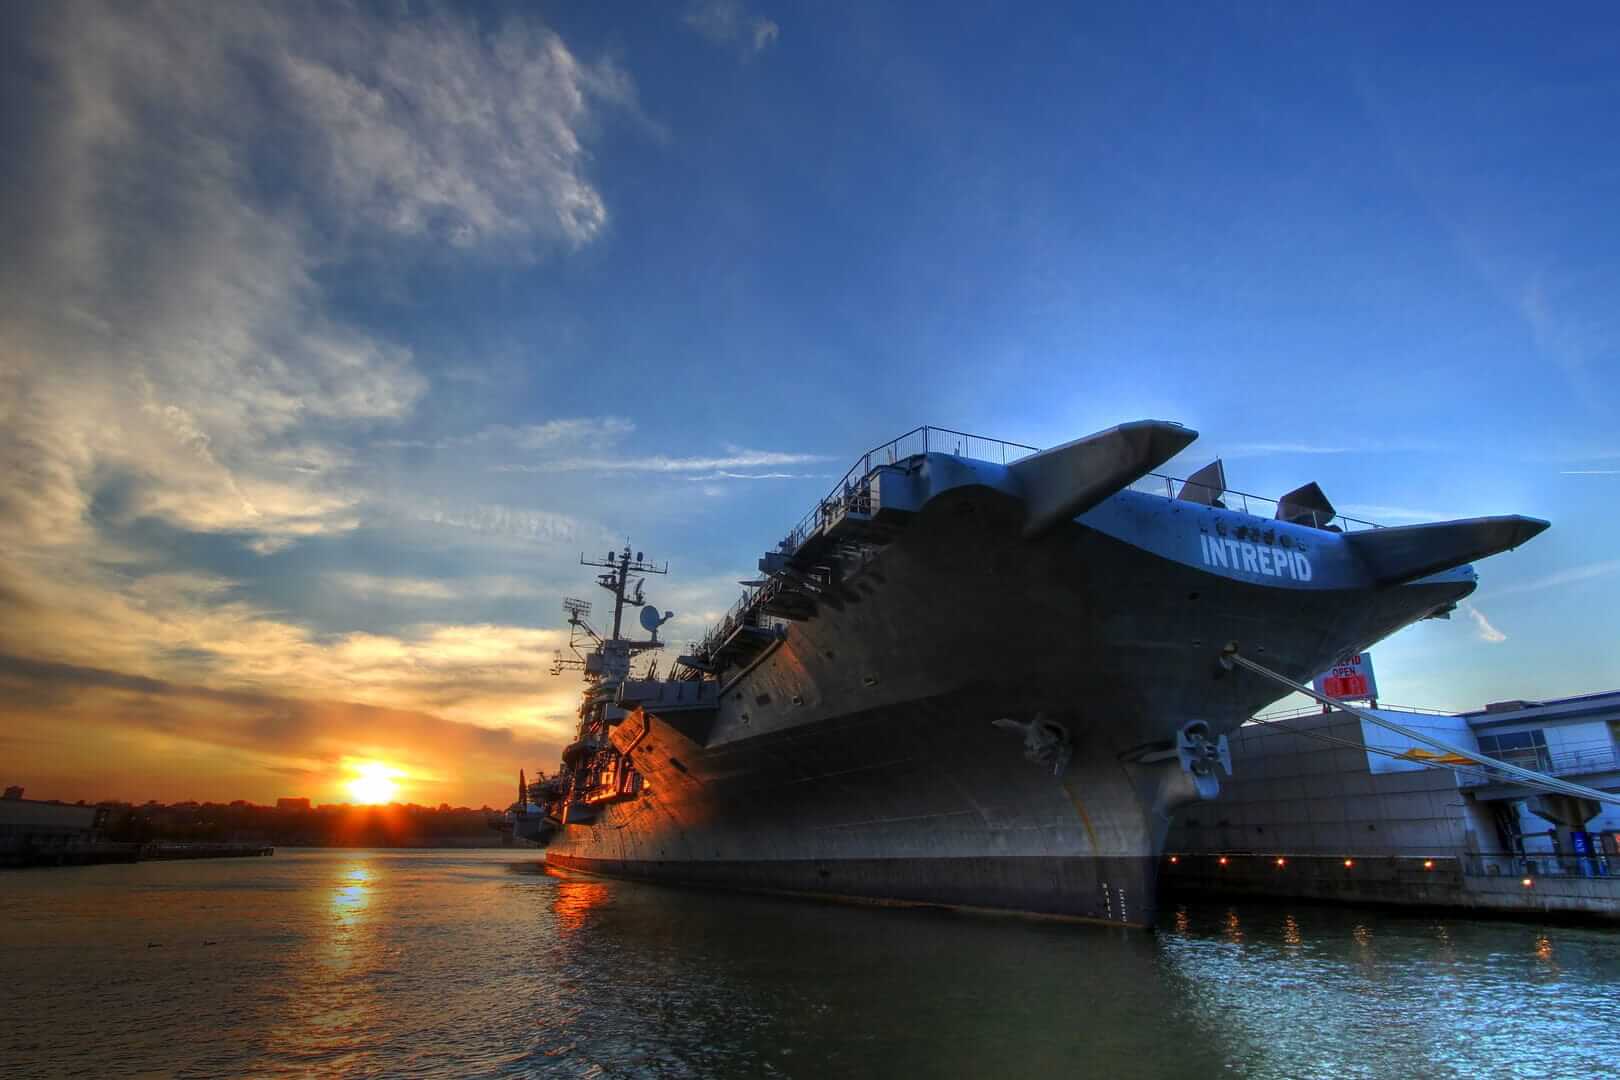 USS Intrepid on the Hudson River at Sunset PHOTO CREDIT Intrepid Sea Air Space Museum